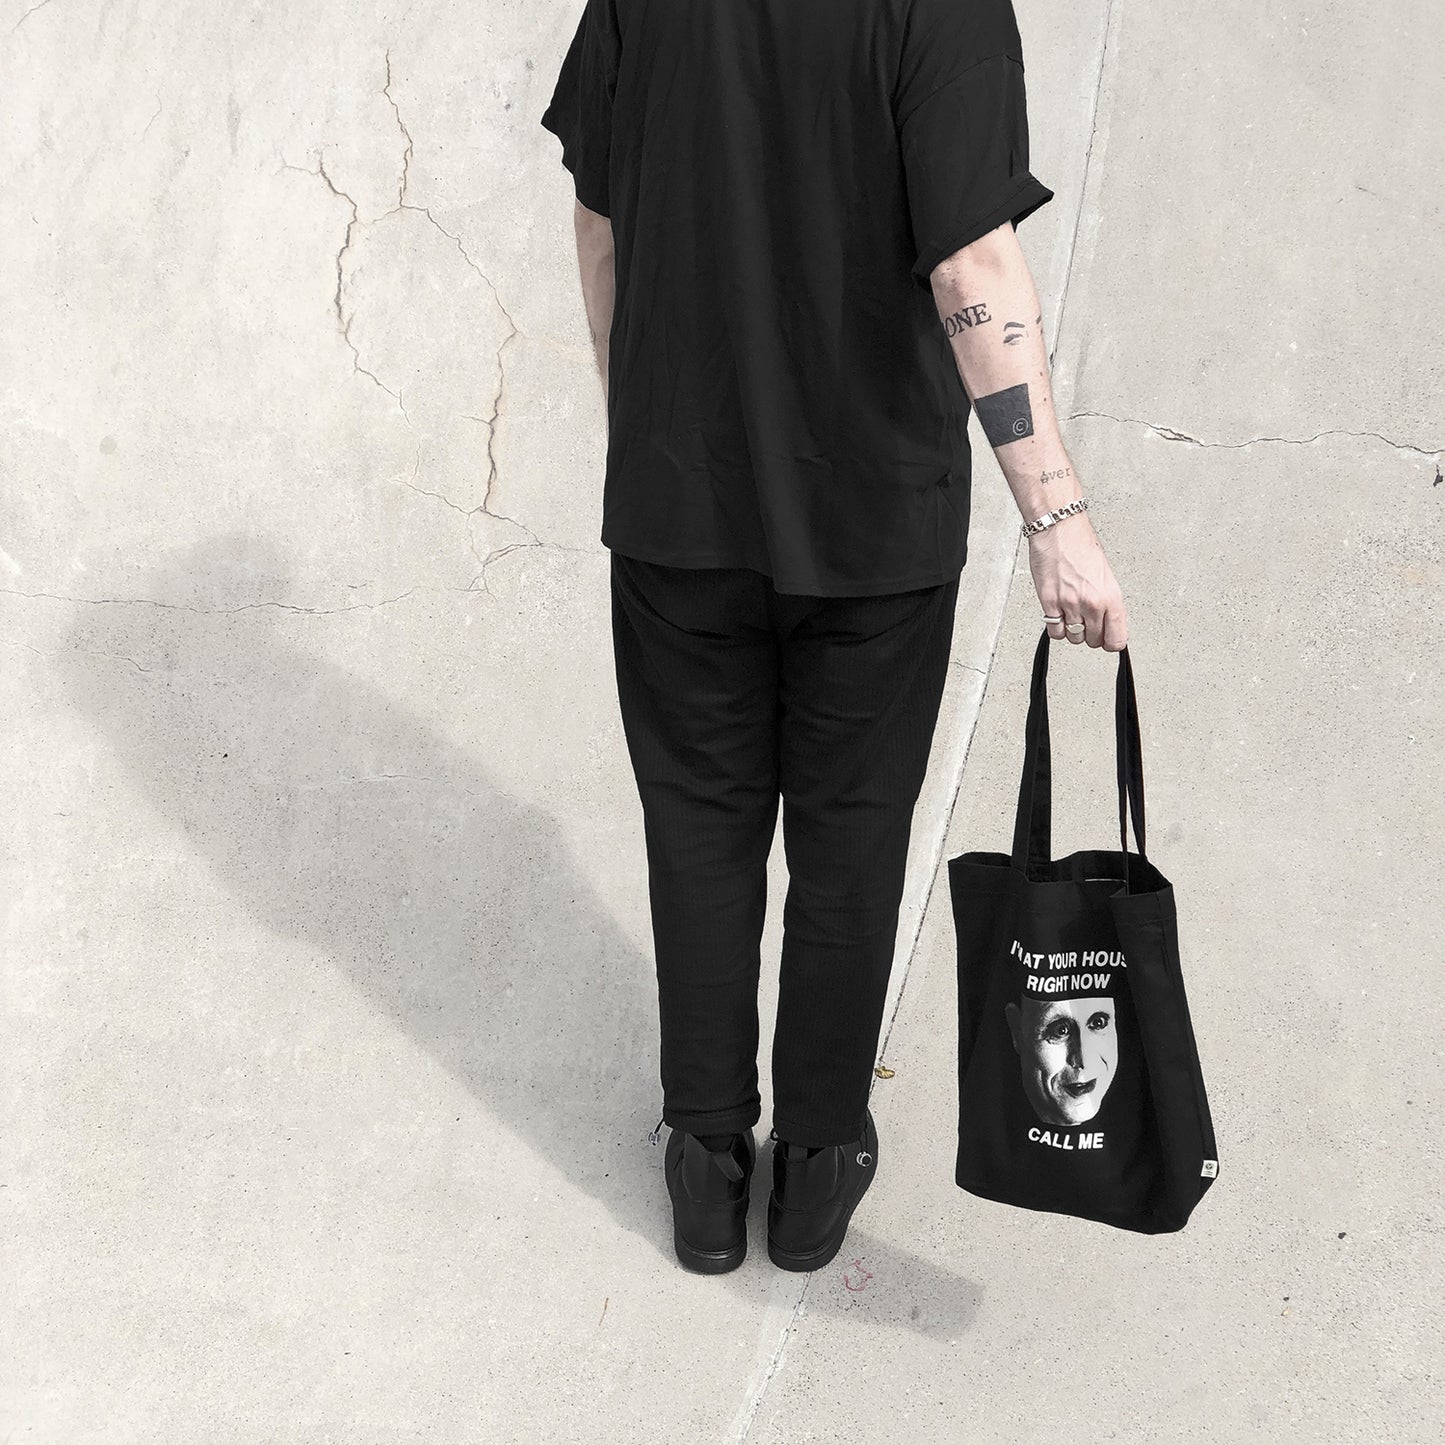 Lost Highway - Mystery Man Eco Tote Bag